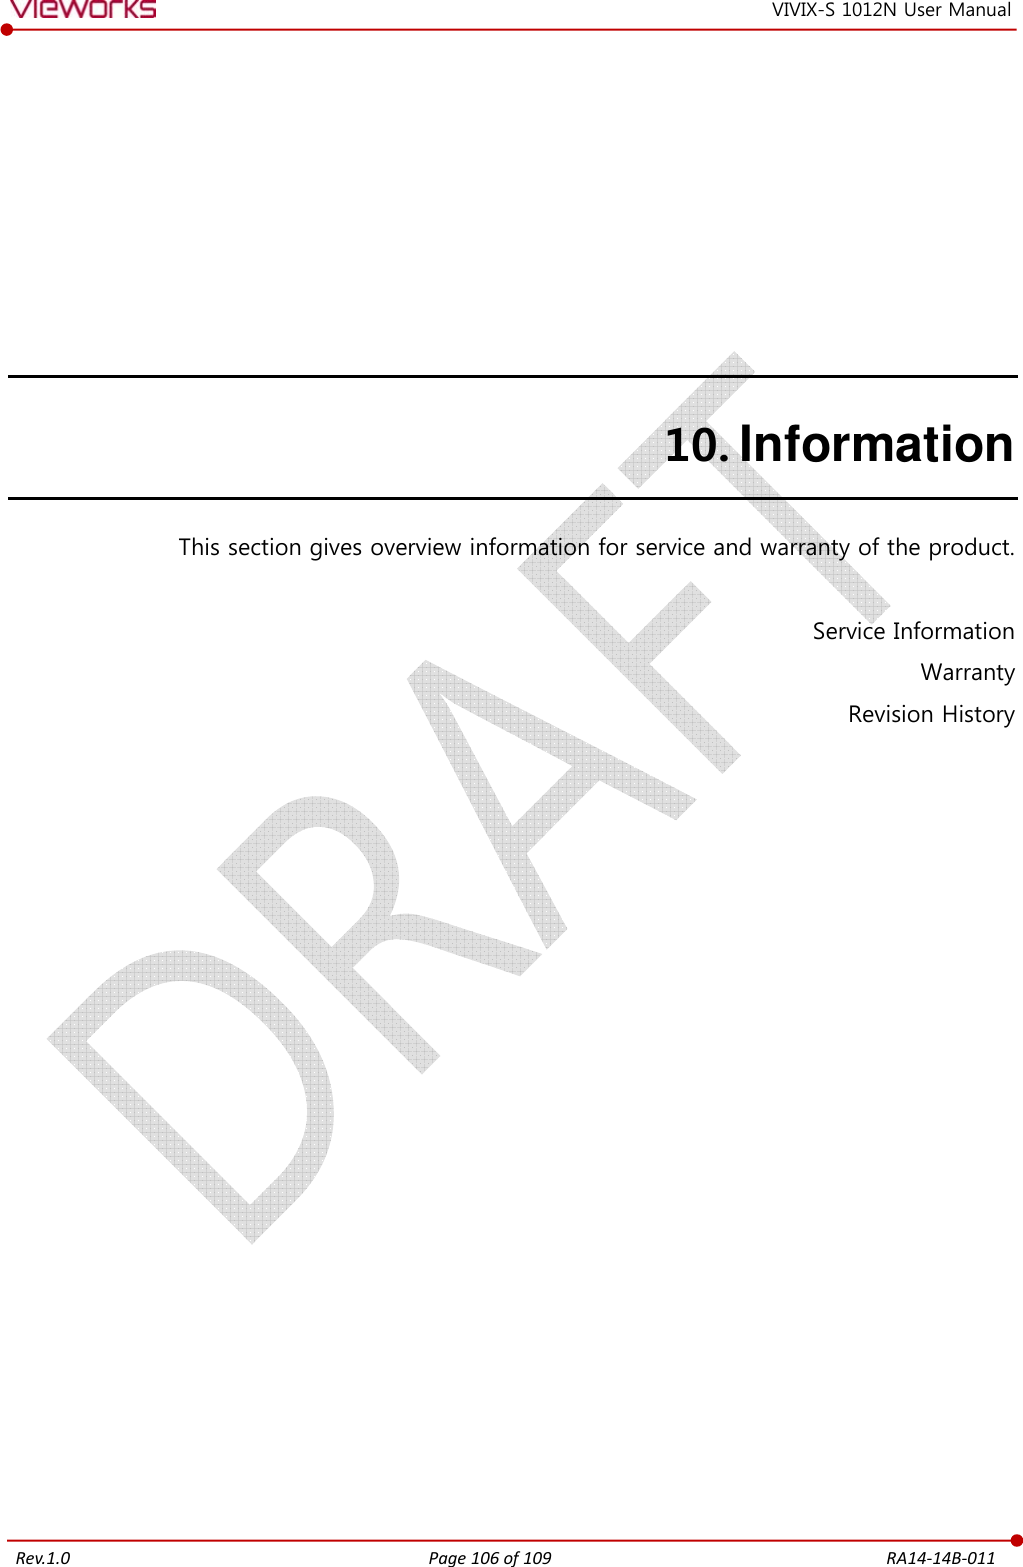   Rev.1.0 Page 106 of 109  RA14-14B-011 VIVIX-S 1012N User Manual 10. Information This section gives overview information for service and warranty of the product.  Service Information Warranty Revision History        